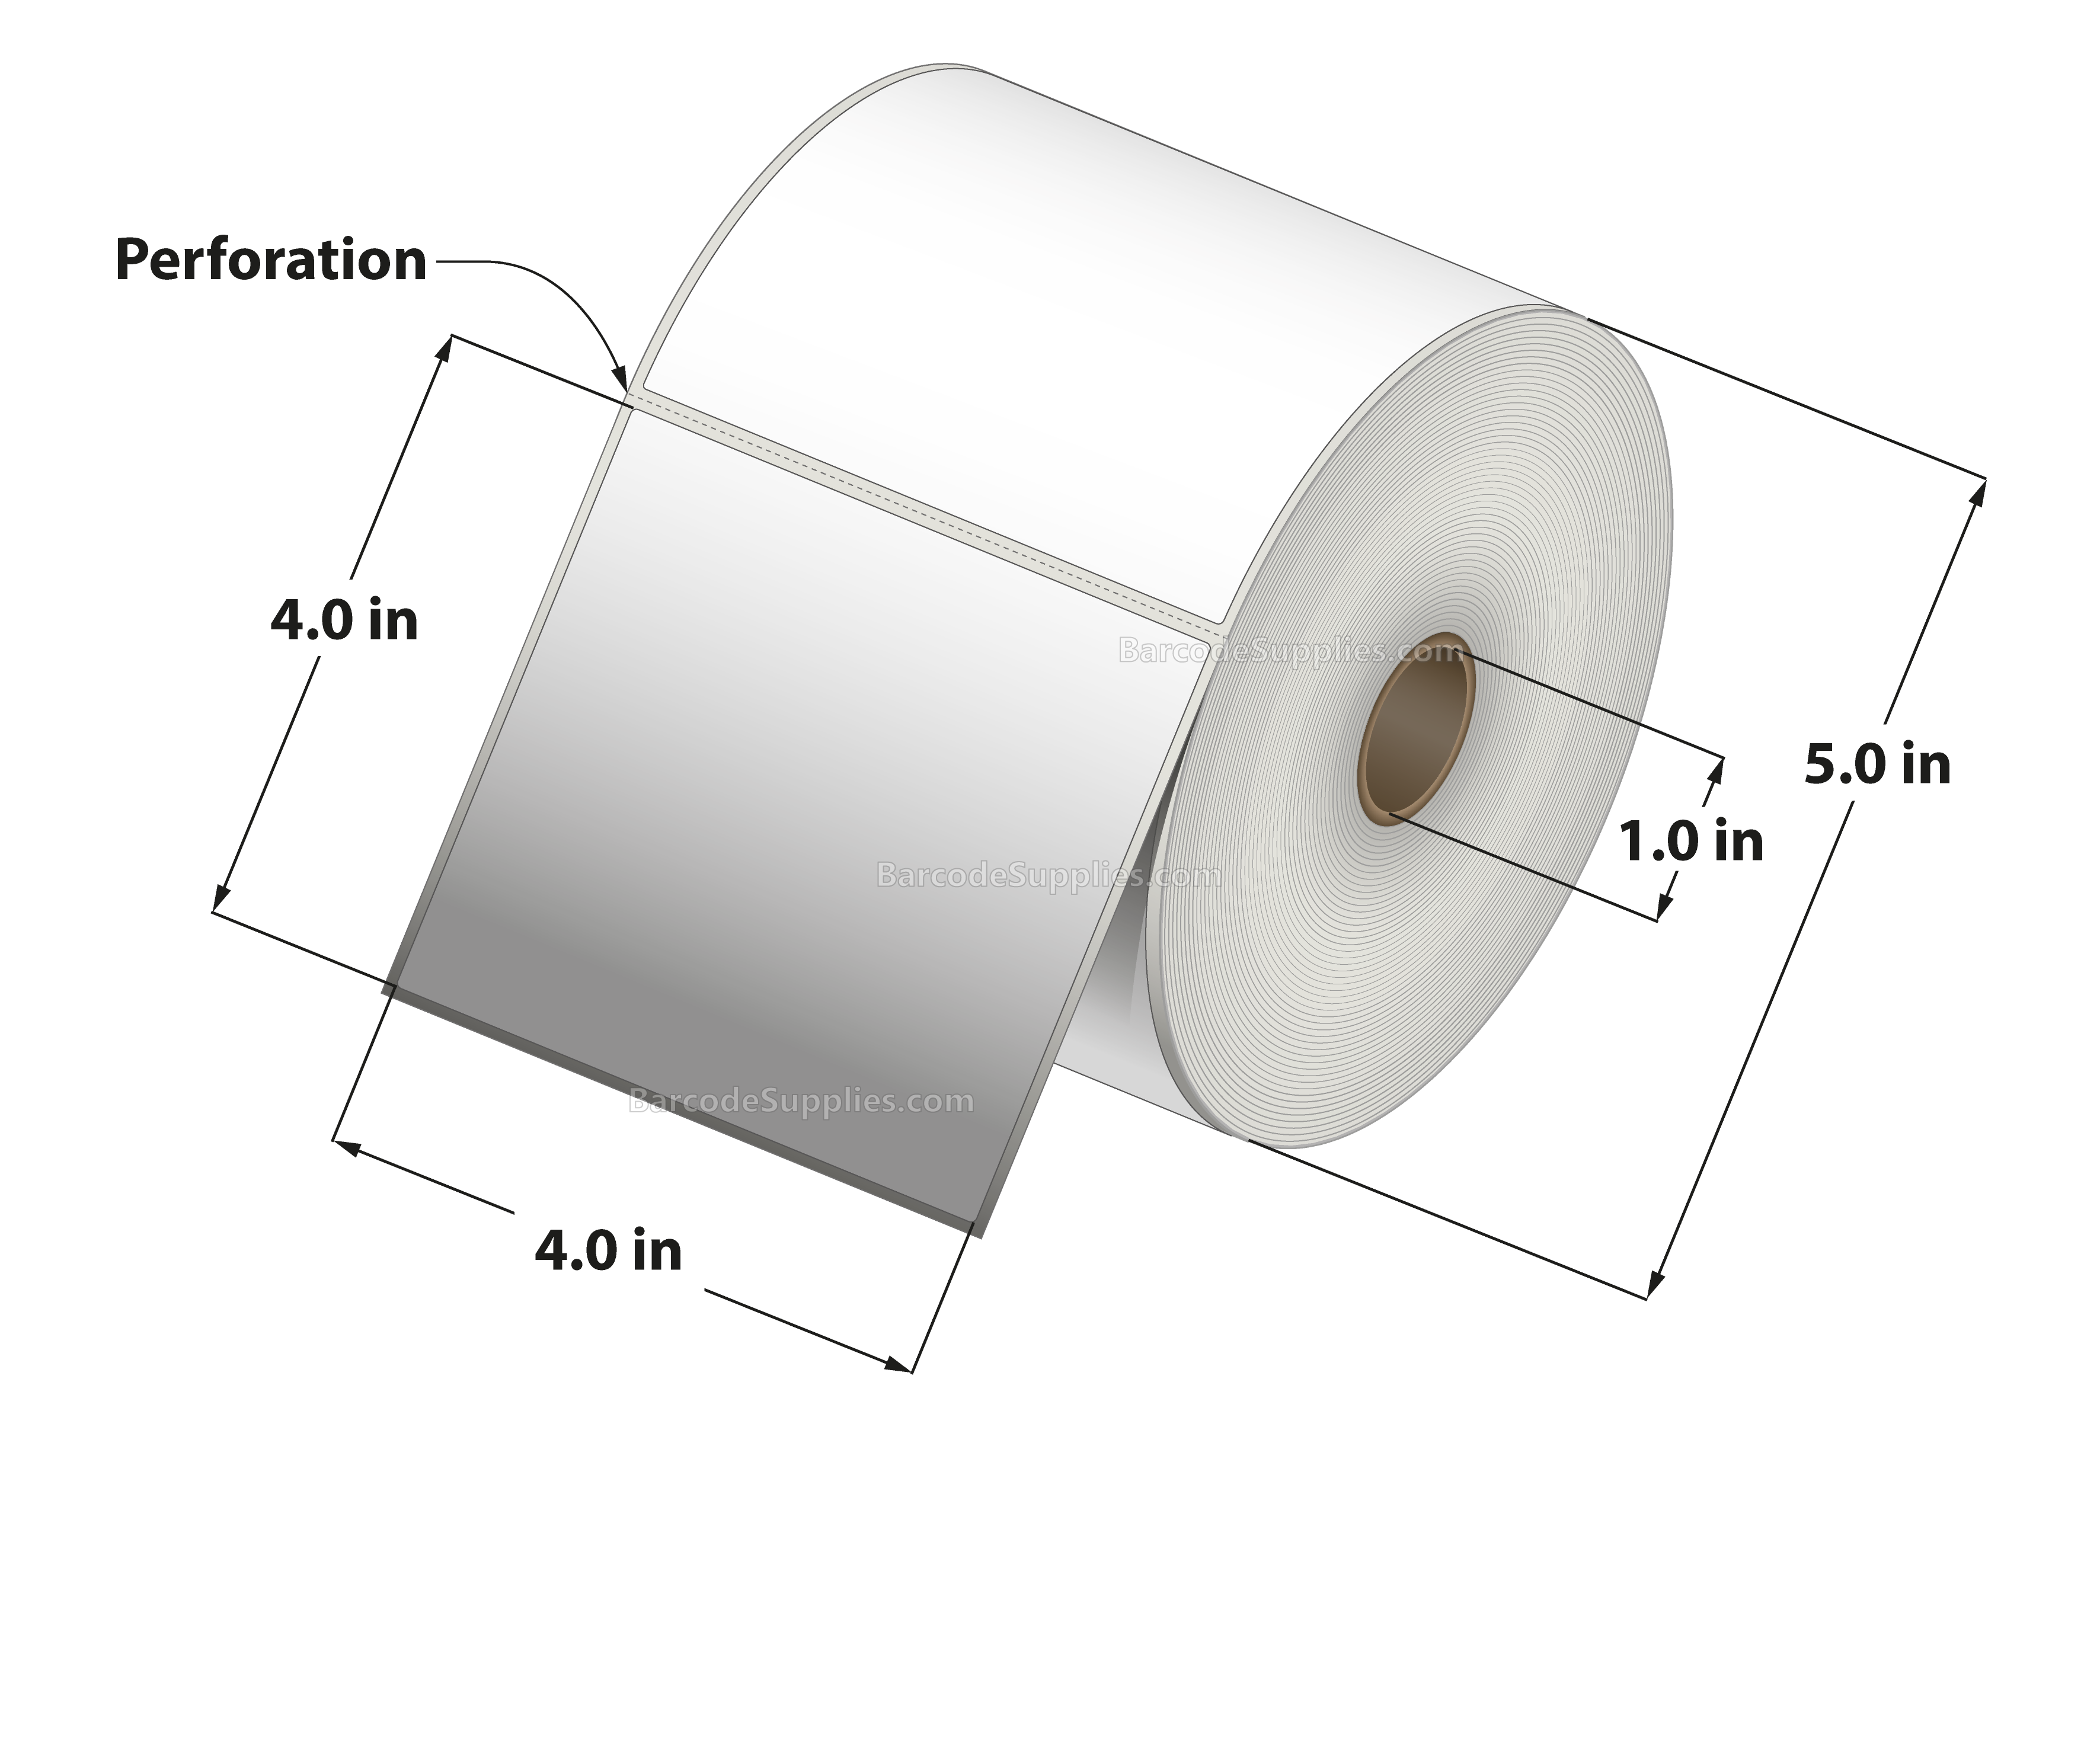 4 x 4 Direct Thermal White Labels With Acrylic Adhesive - Perforated - 700 Labels Per Roll - Carton Of 12 Rolls - 8400 Labels Total - MPN: RD-4-4-700-1 - BarcodeSource, Inc.